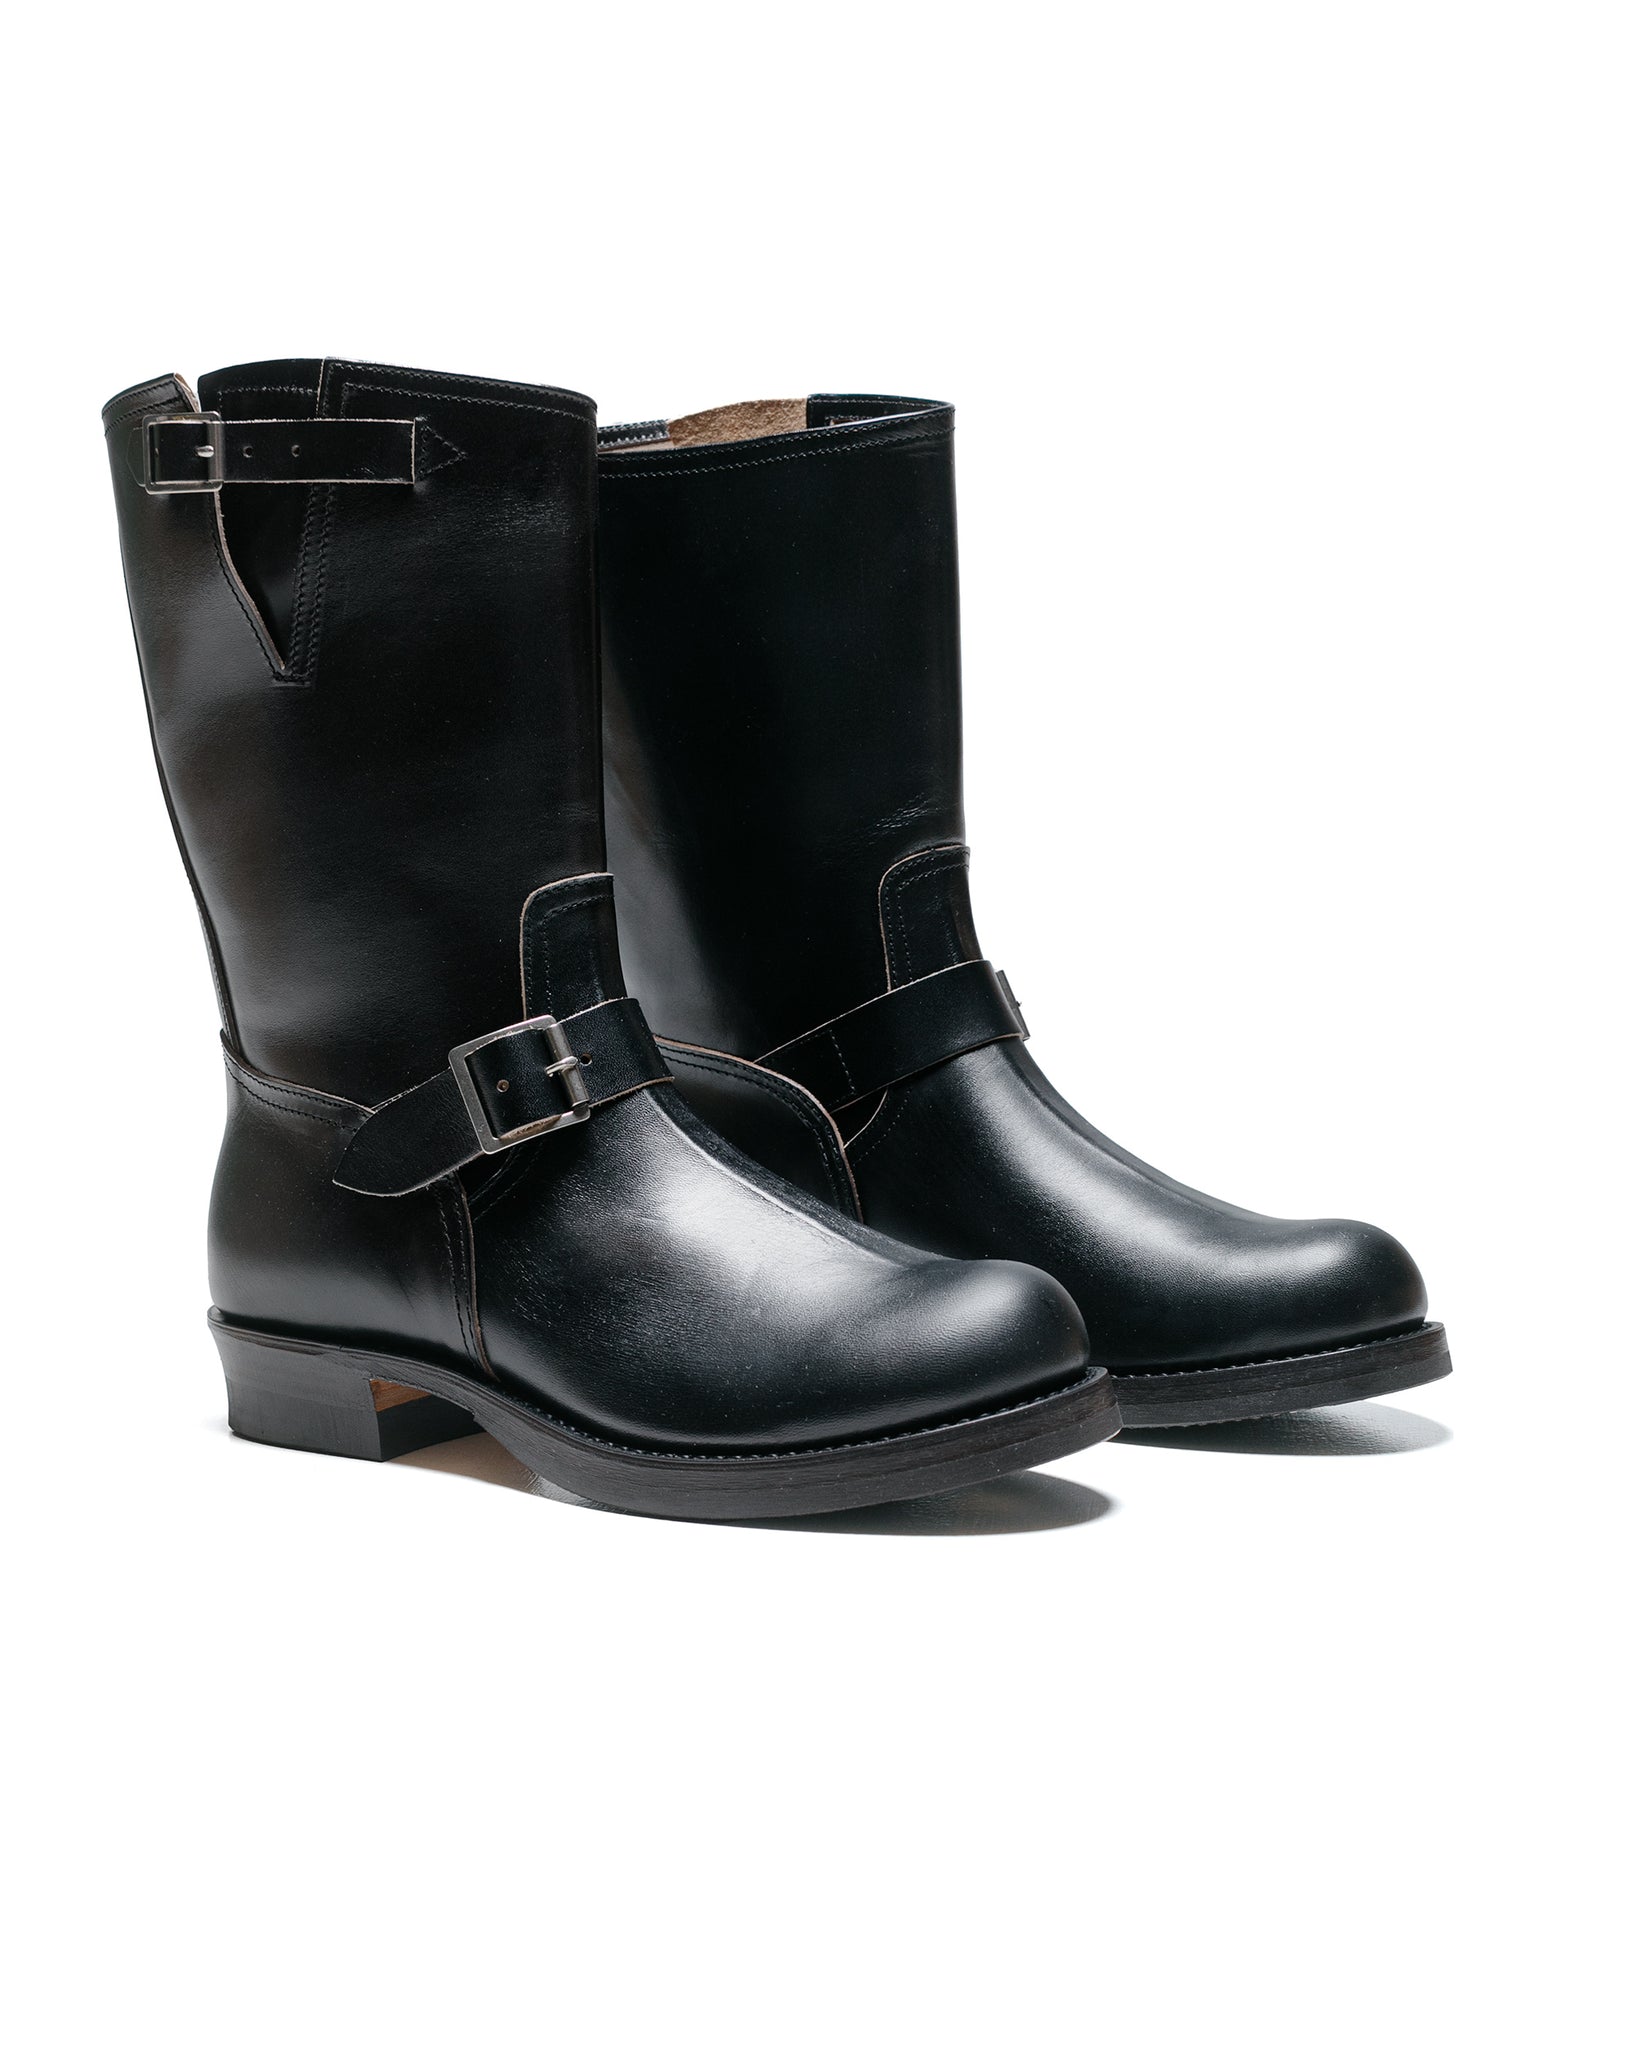 The Real McCoy's BA22001 Buco Engineer Boots  Buttock Black side